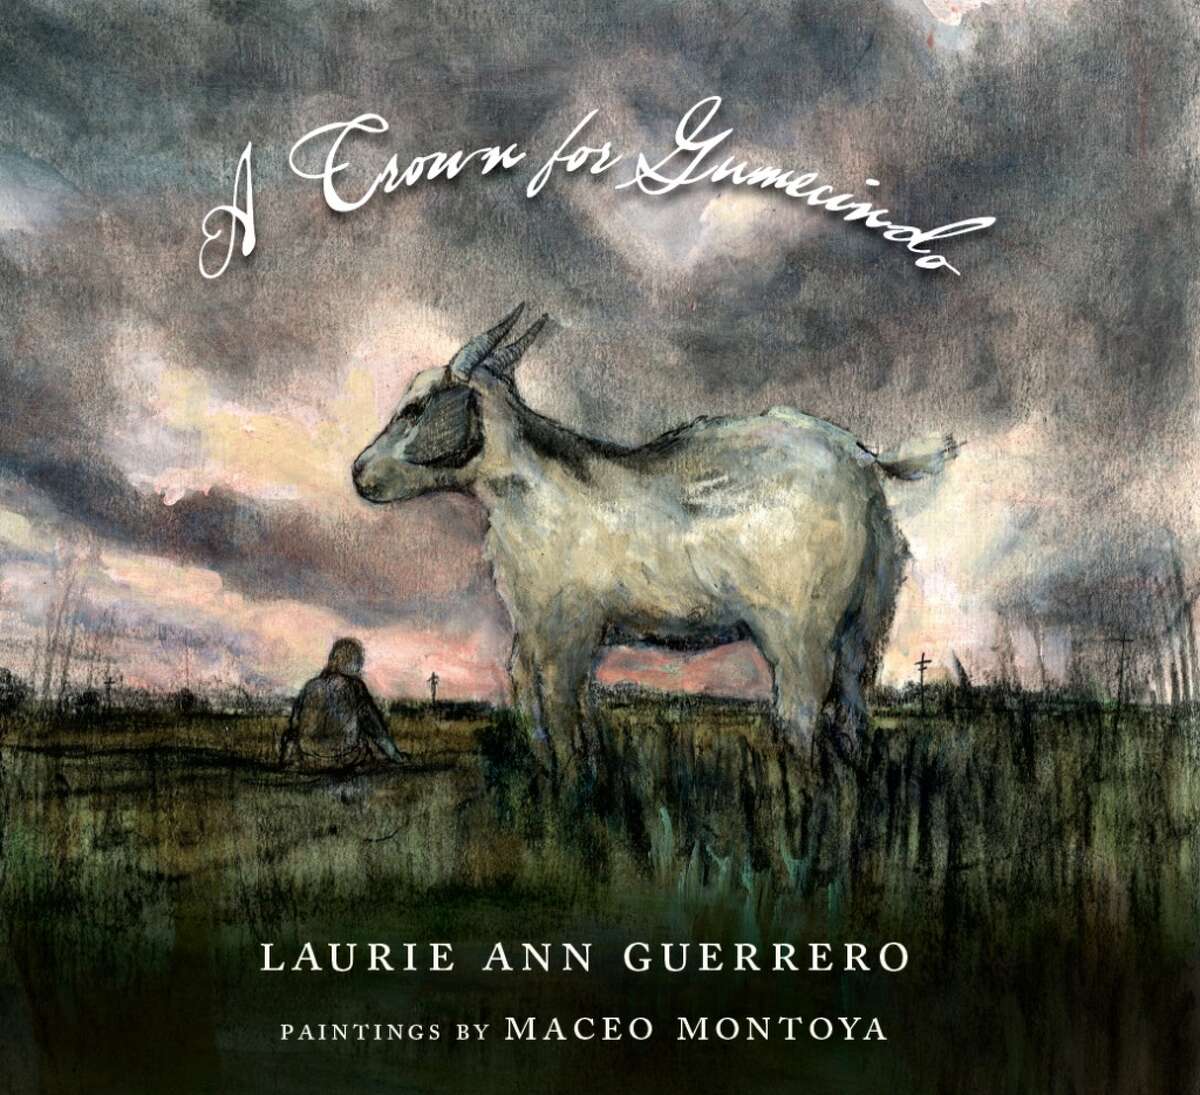 Laurie Ann Guerrero's new collection of 15 sonnets "A Crown for Gumecindo" is dedicated to her late grandfather.